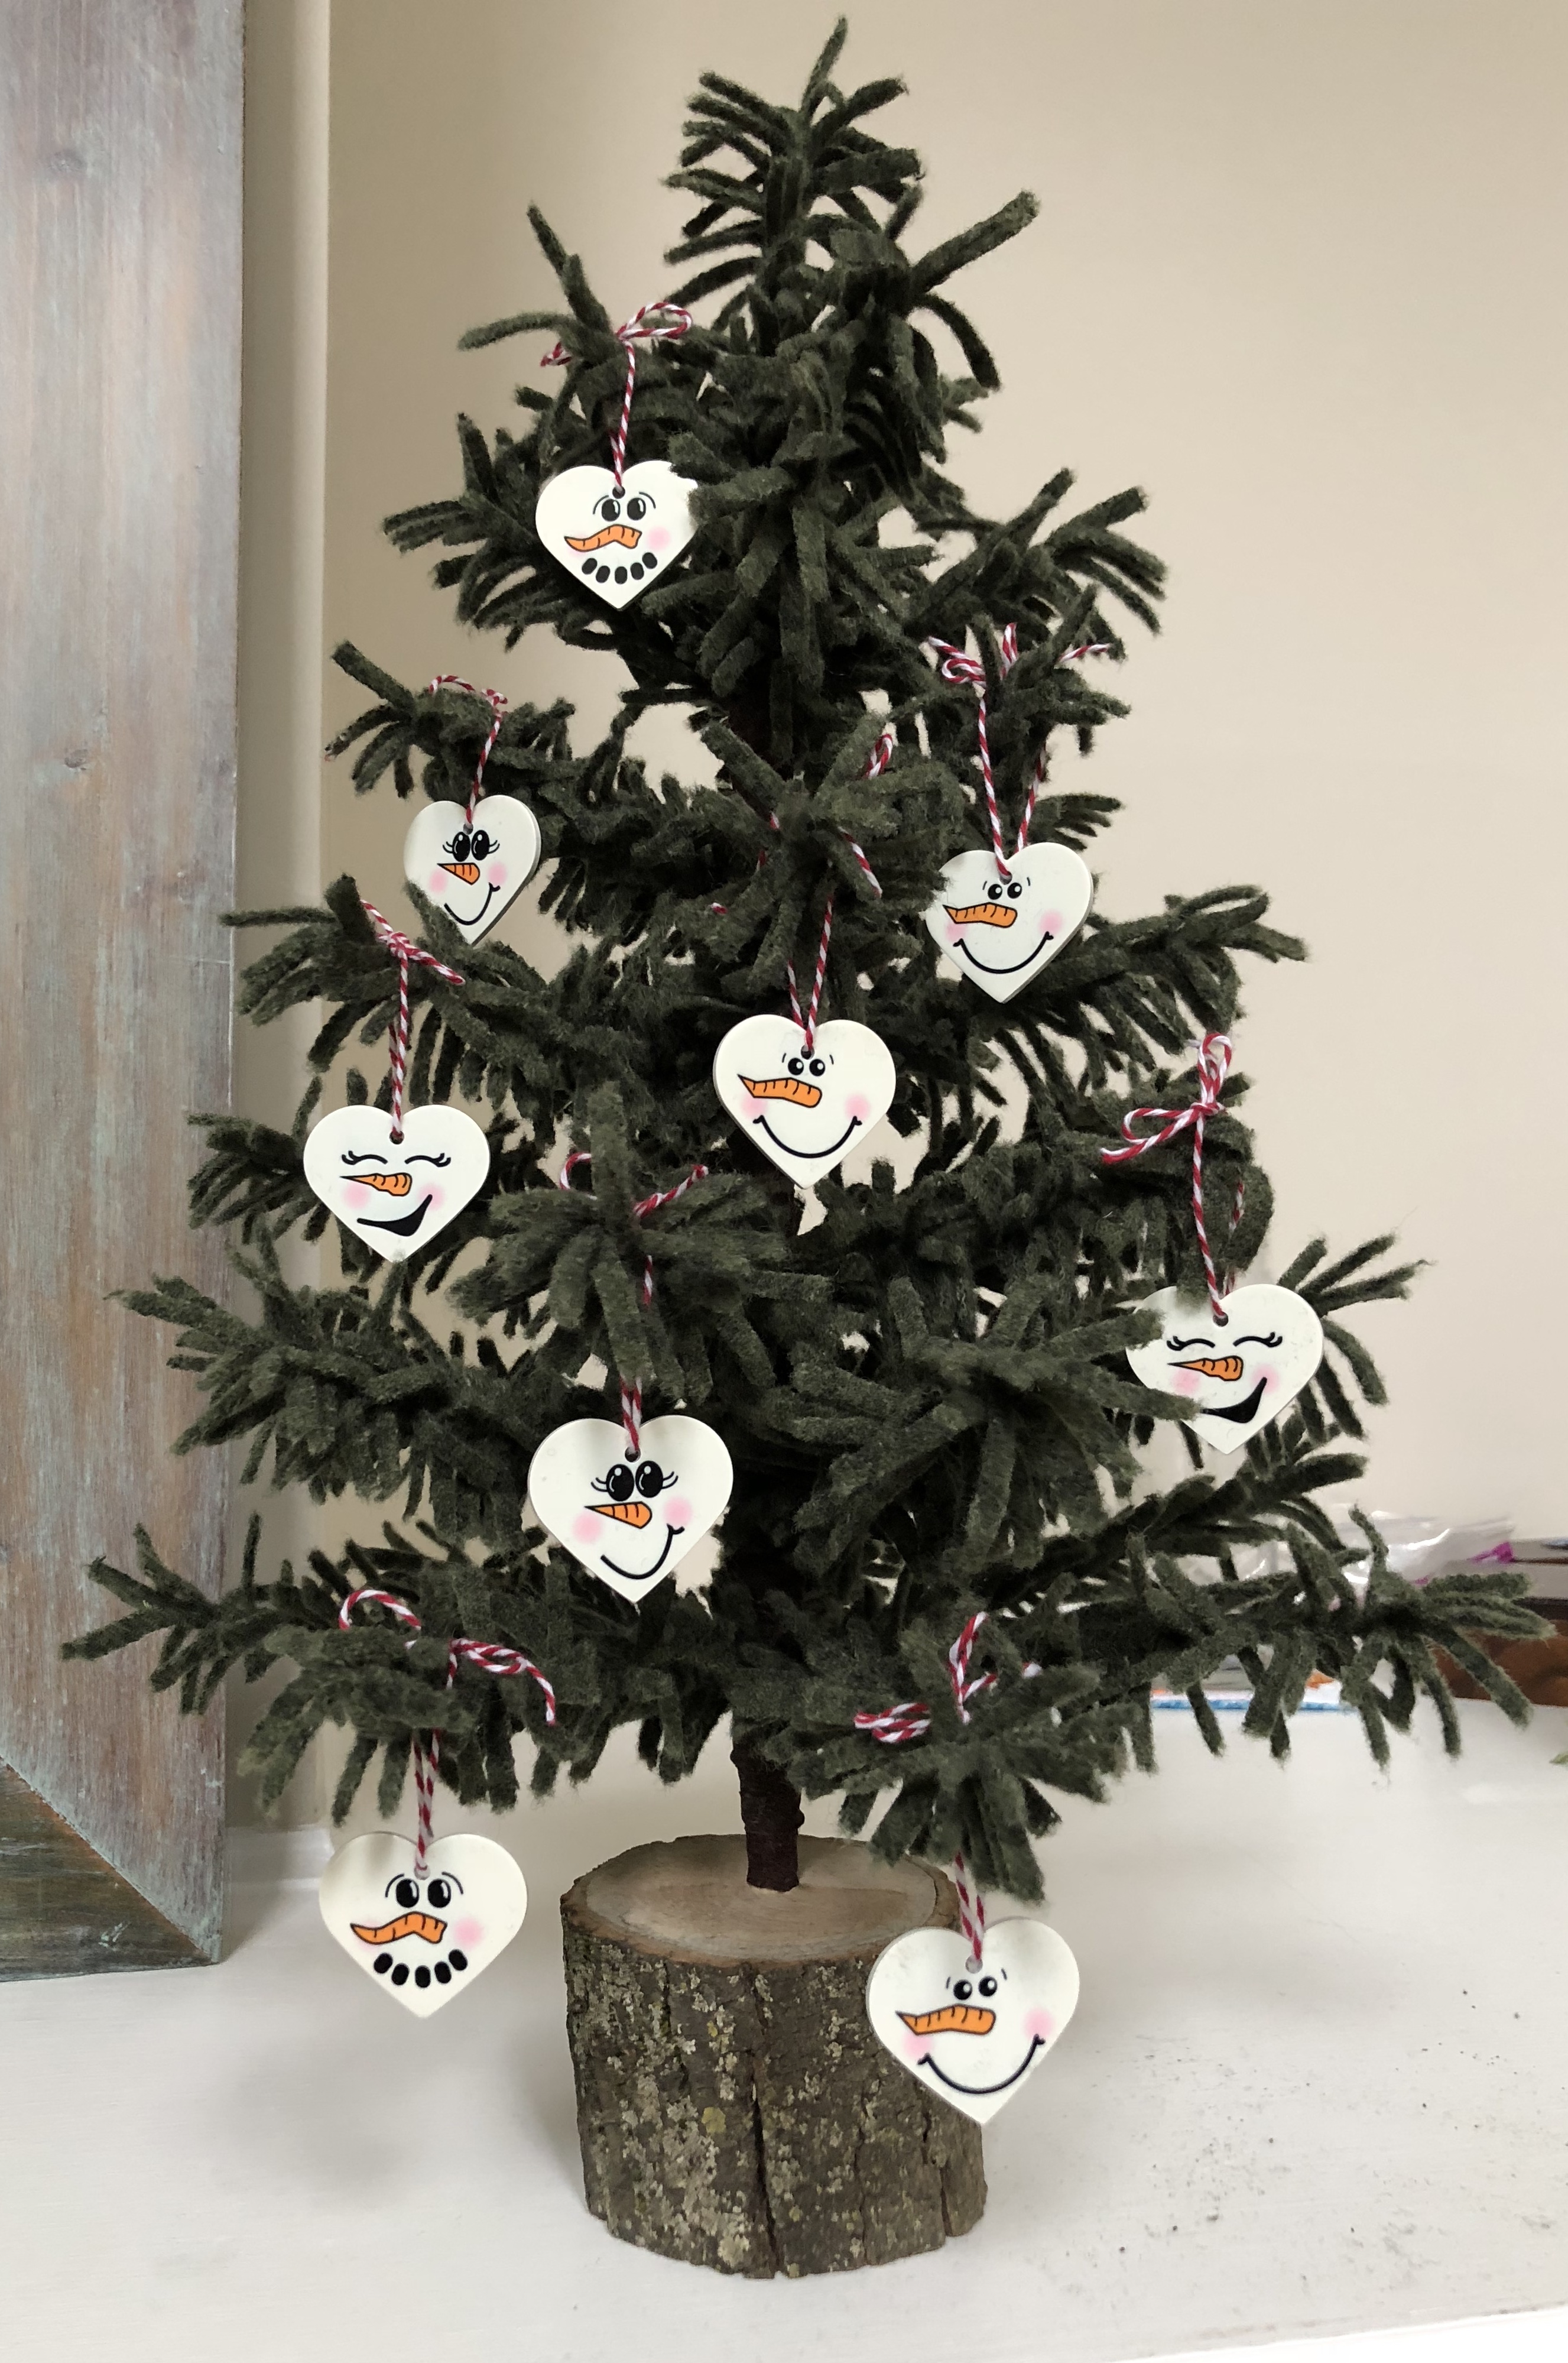 Snowman Poecelain Ornaments made with sublimation printing